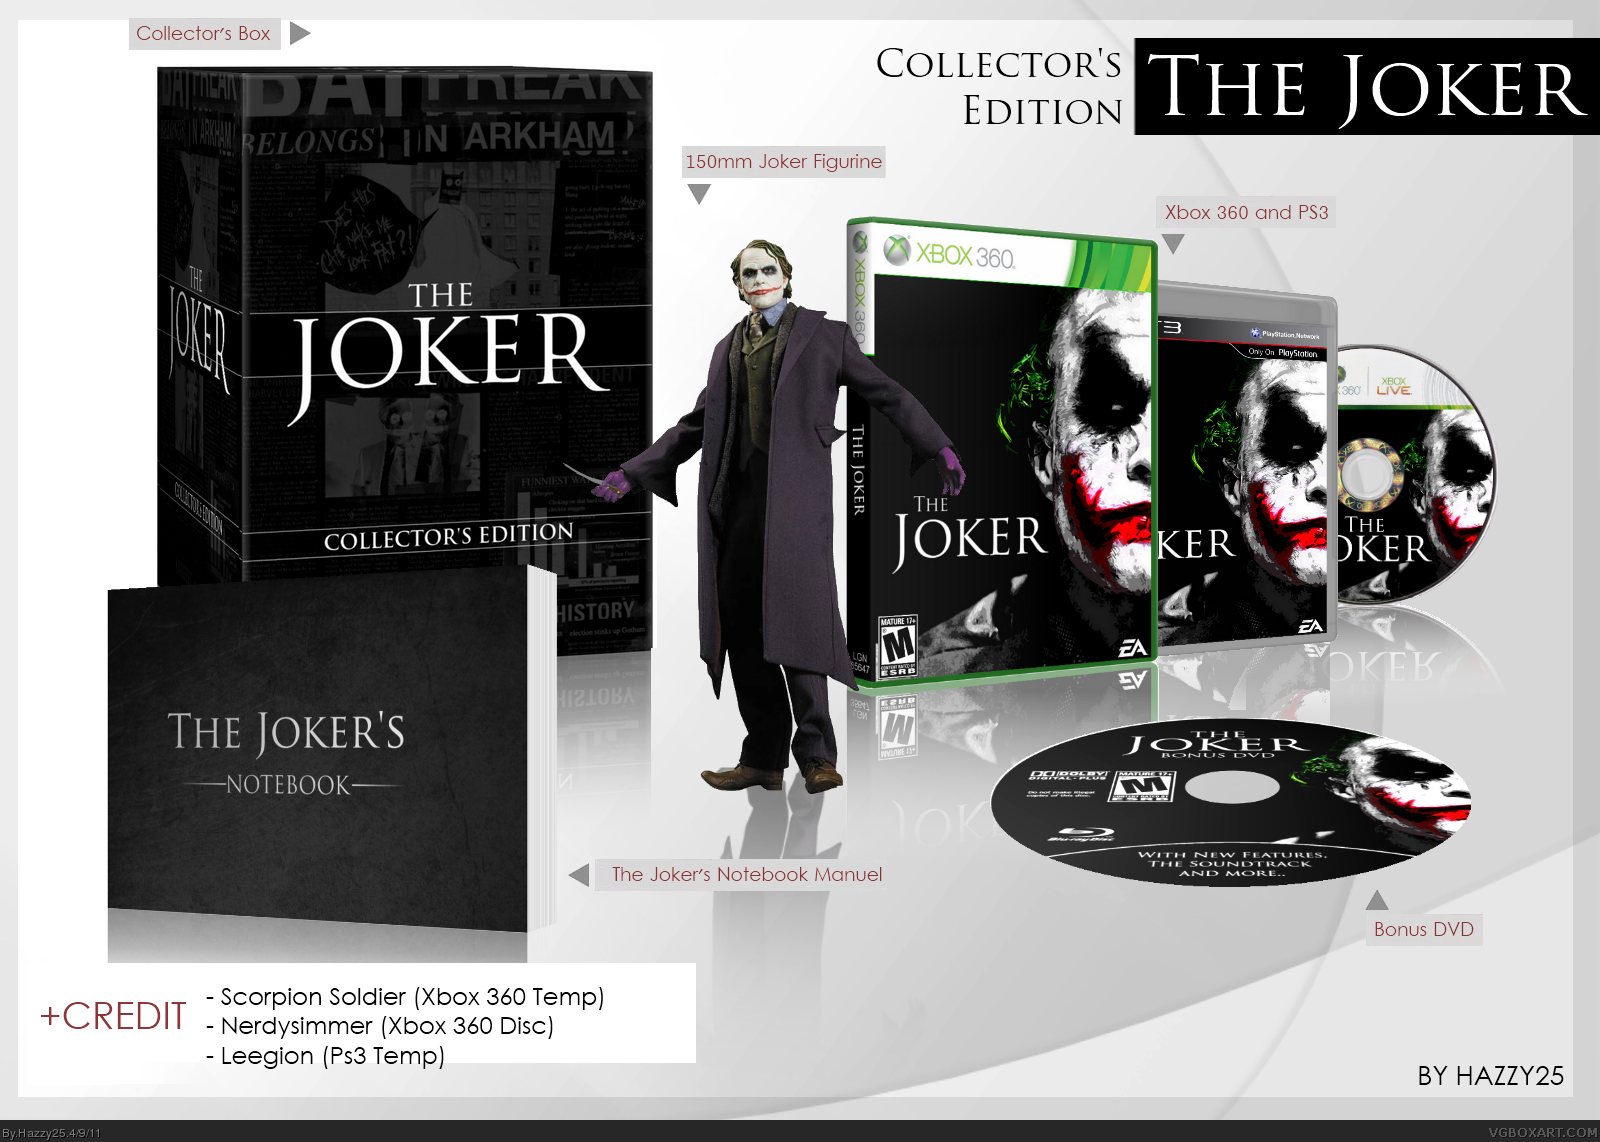 The Joker Collector's Edition box cover